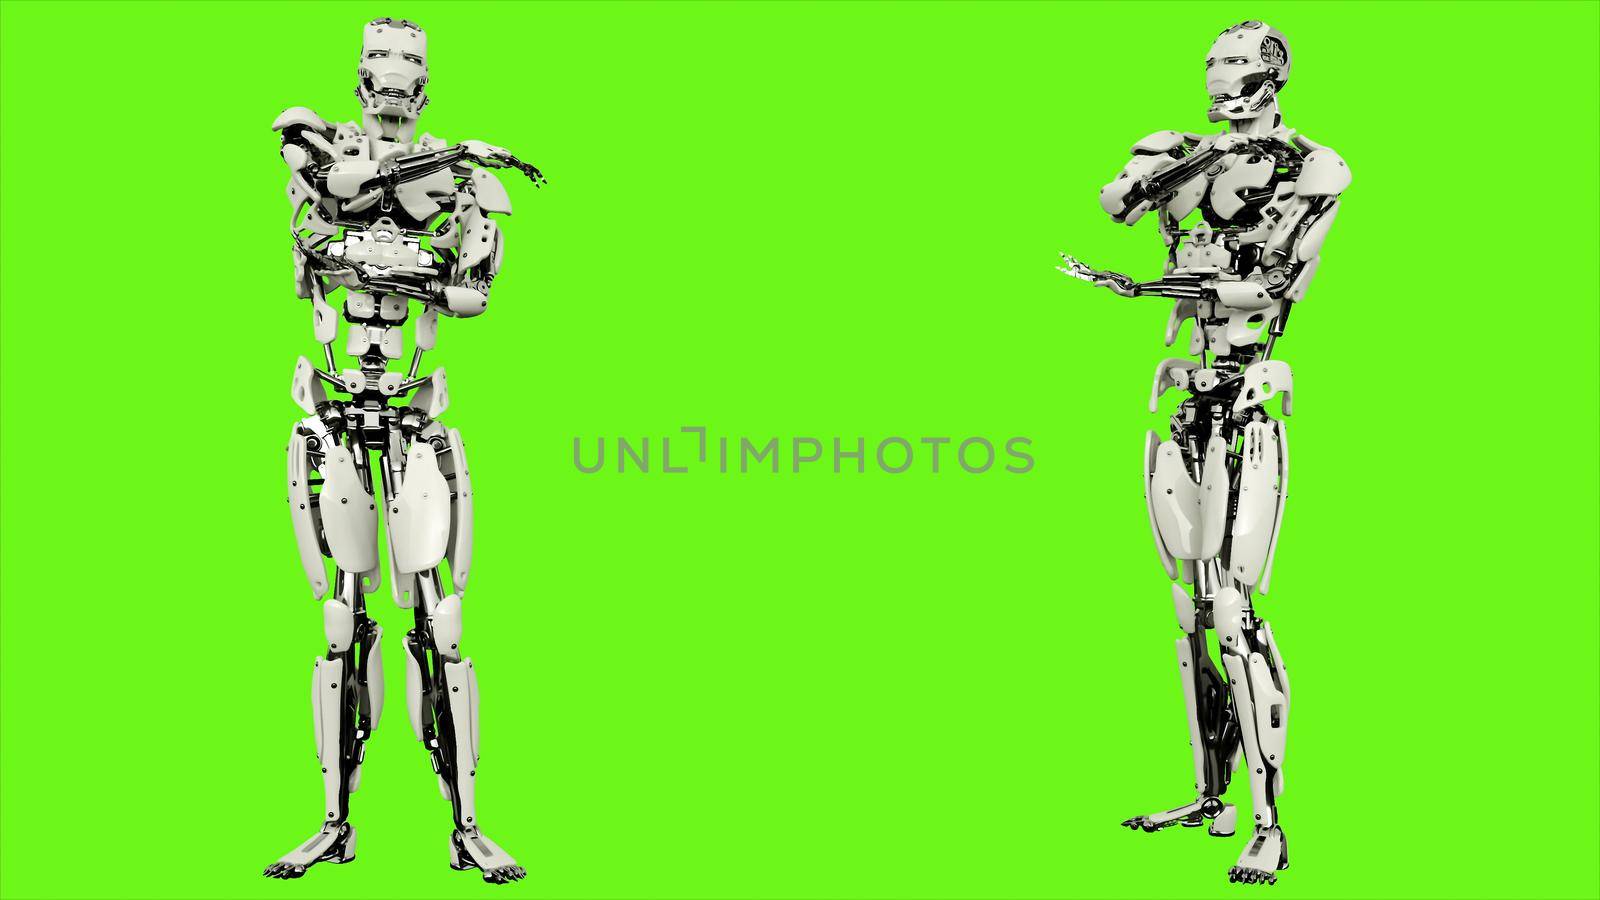 Robot android is arm stretching. Illustration on green screen background.